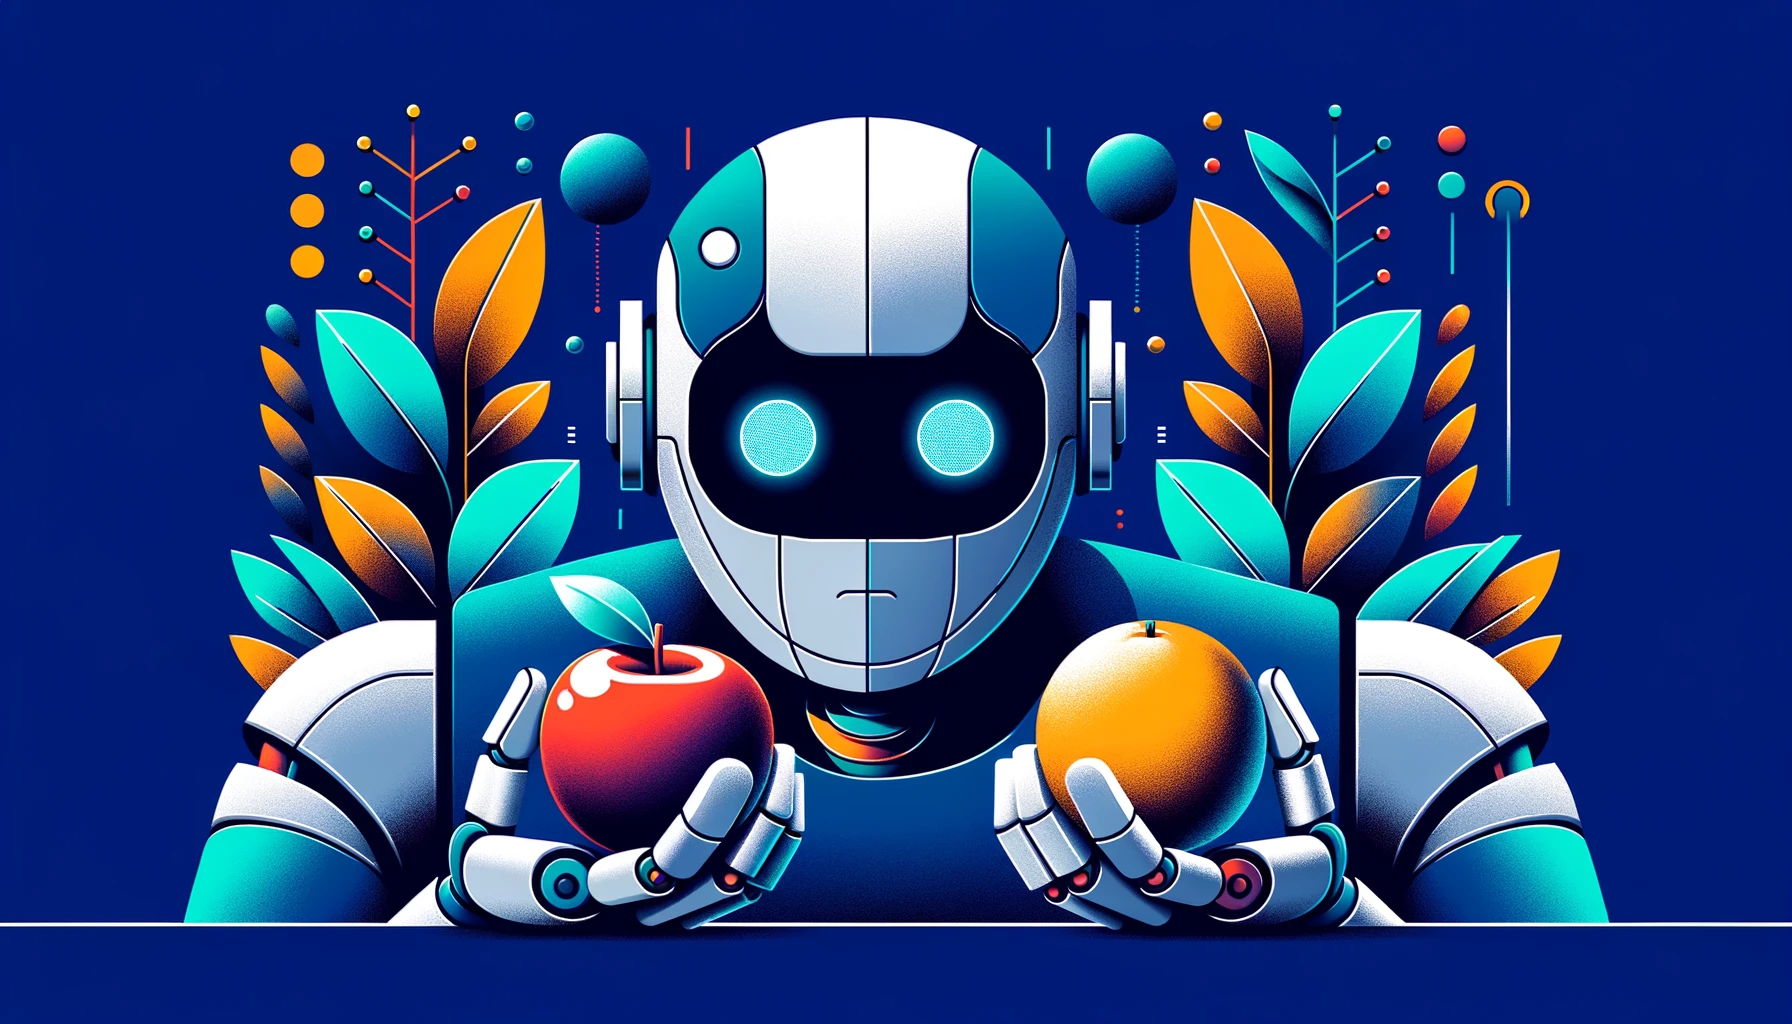 A/B Testing featured image - a robot comparing apples and oranges